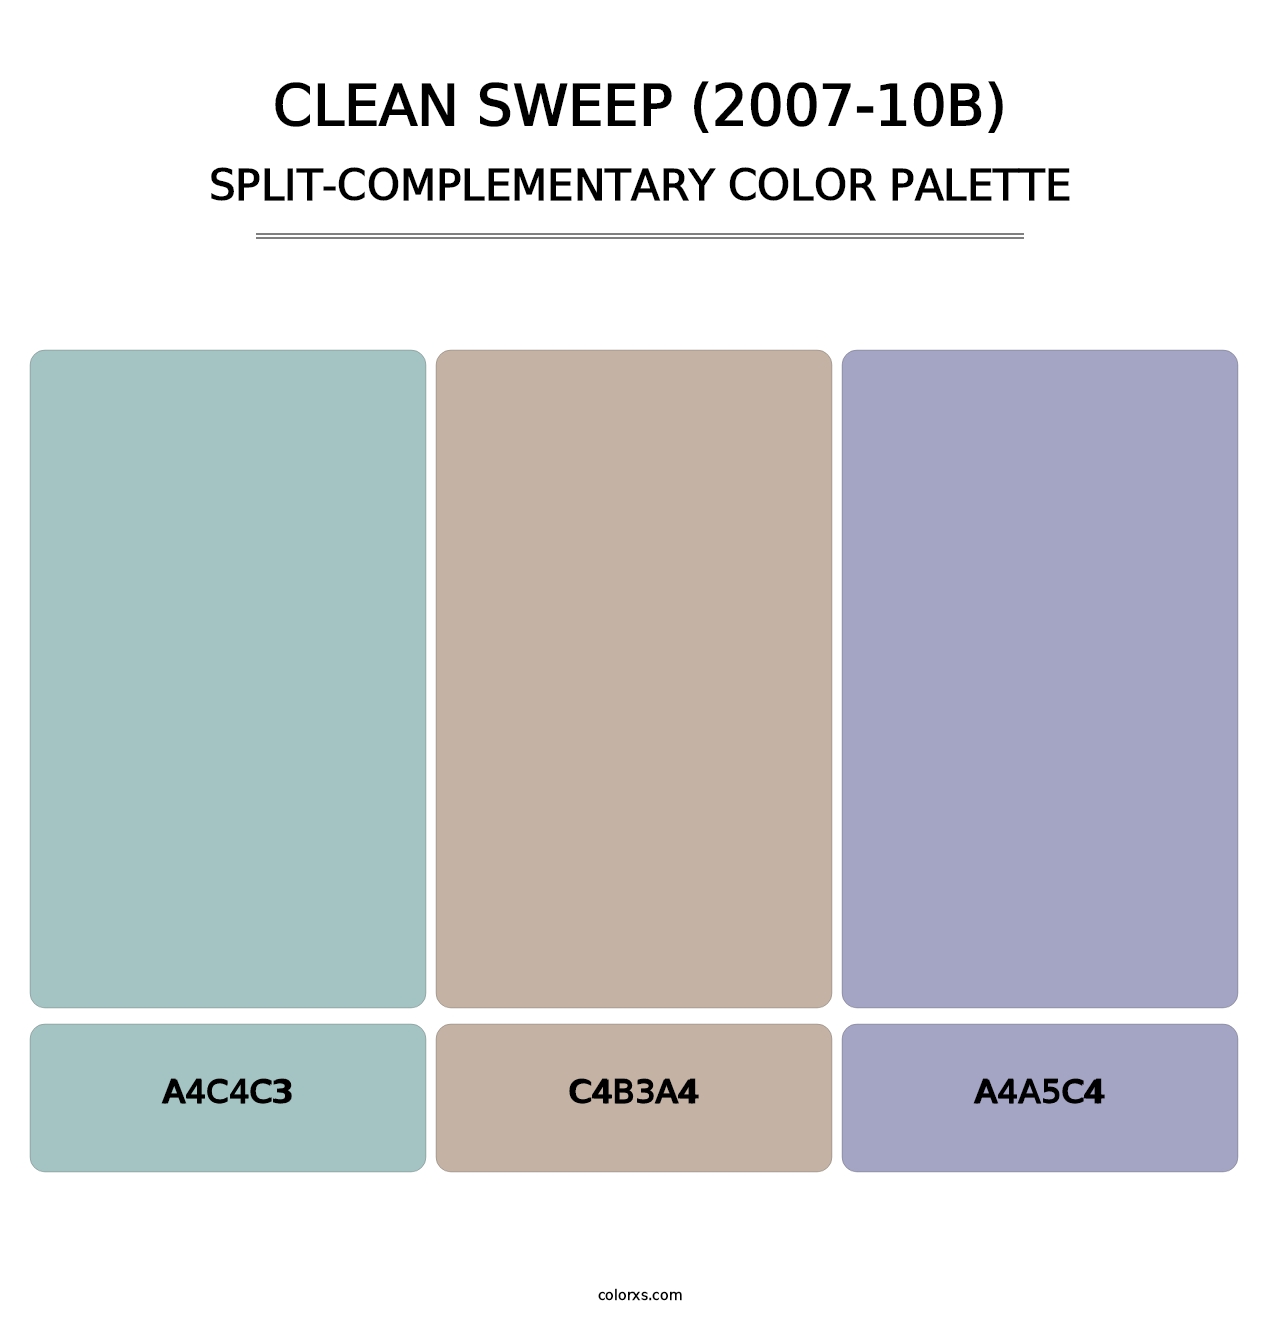 Clean Sweep (2007-10B) - Split-Complementary Color Palette